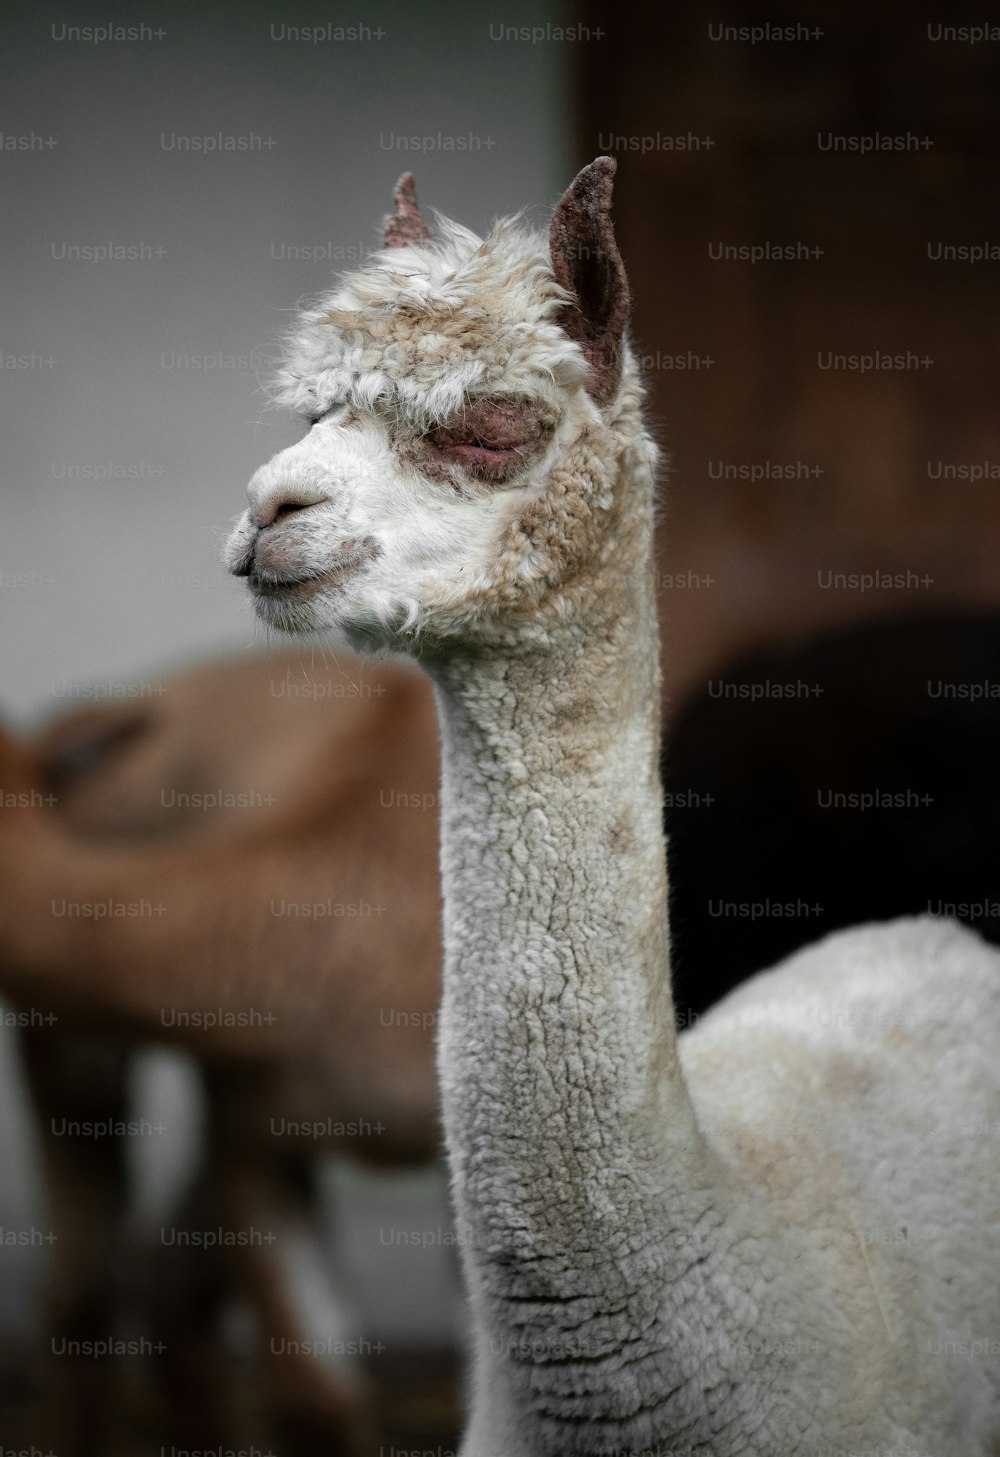 a close up of a llama with other llamas in the background